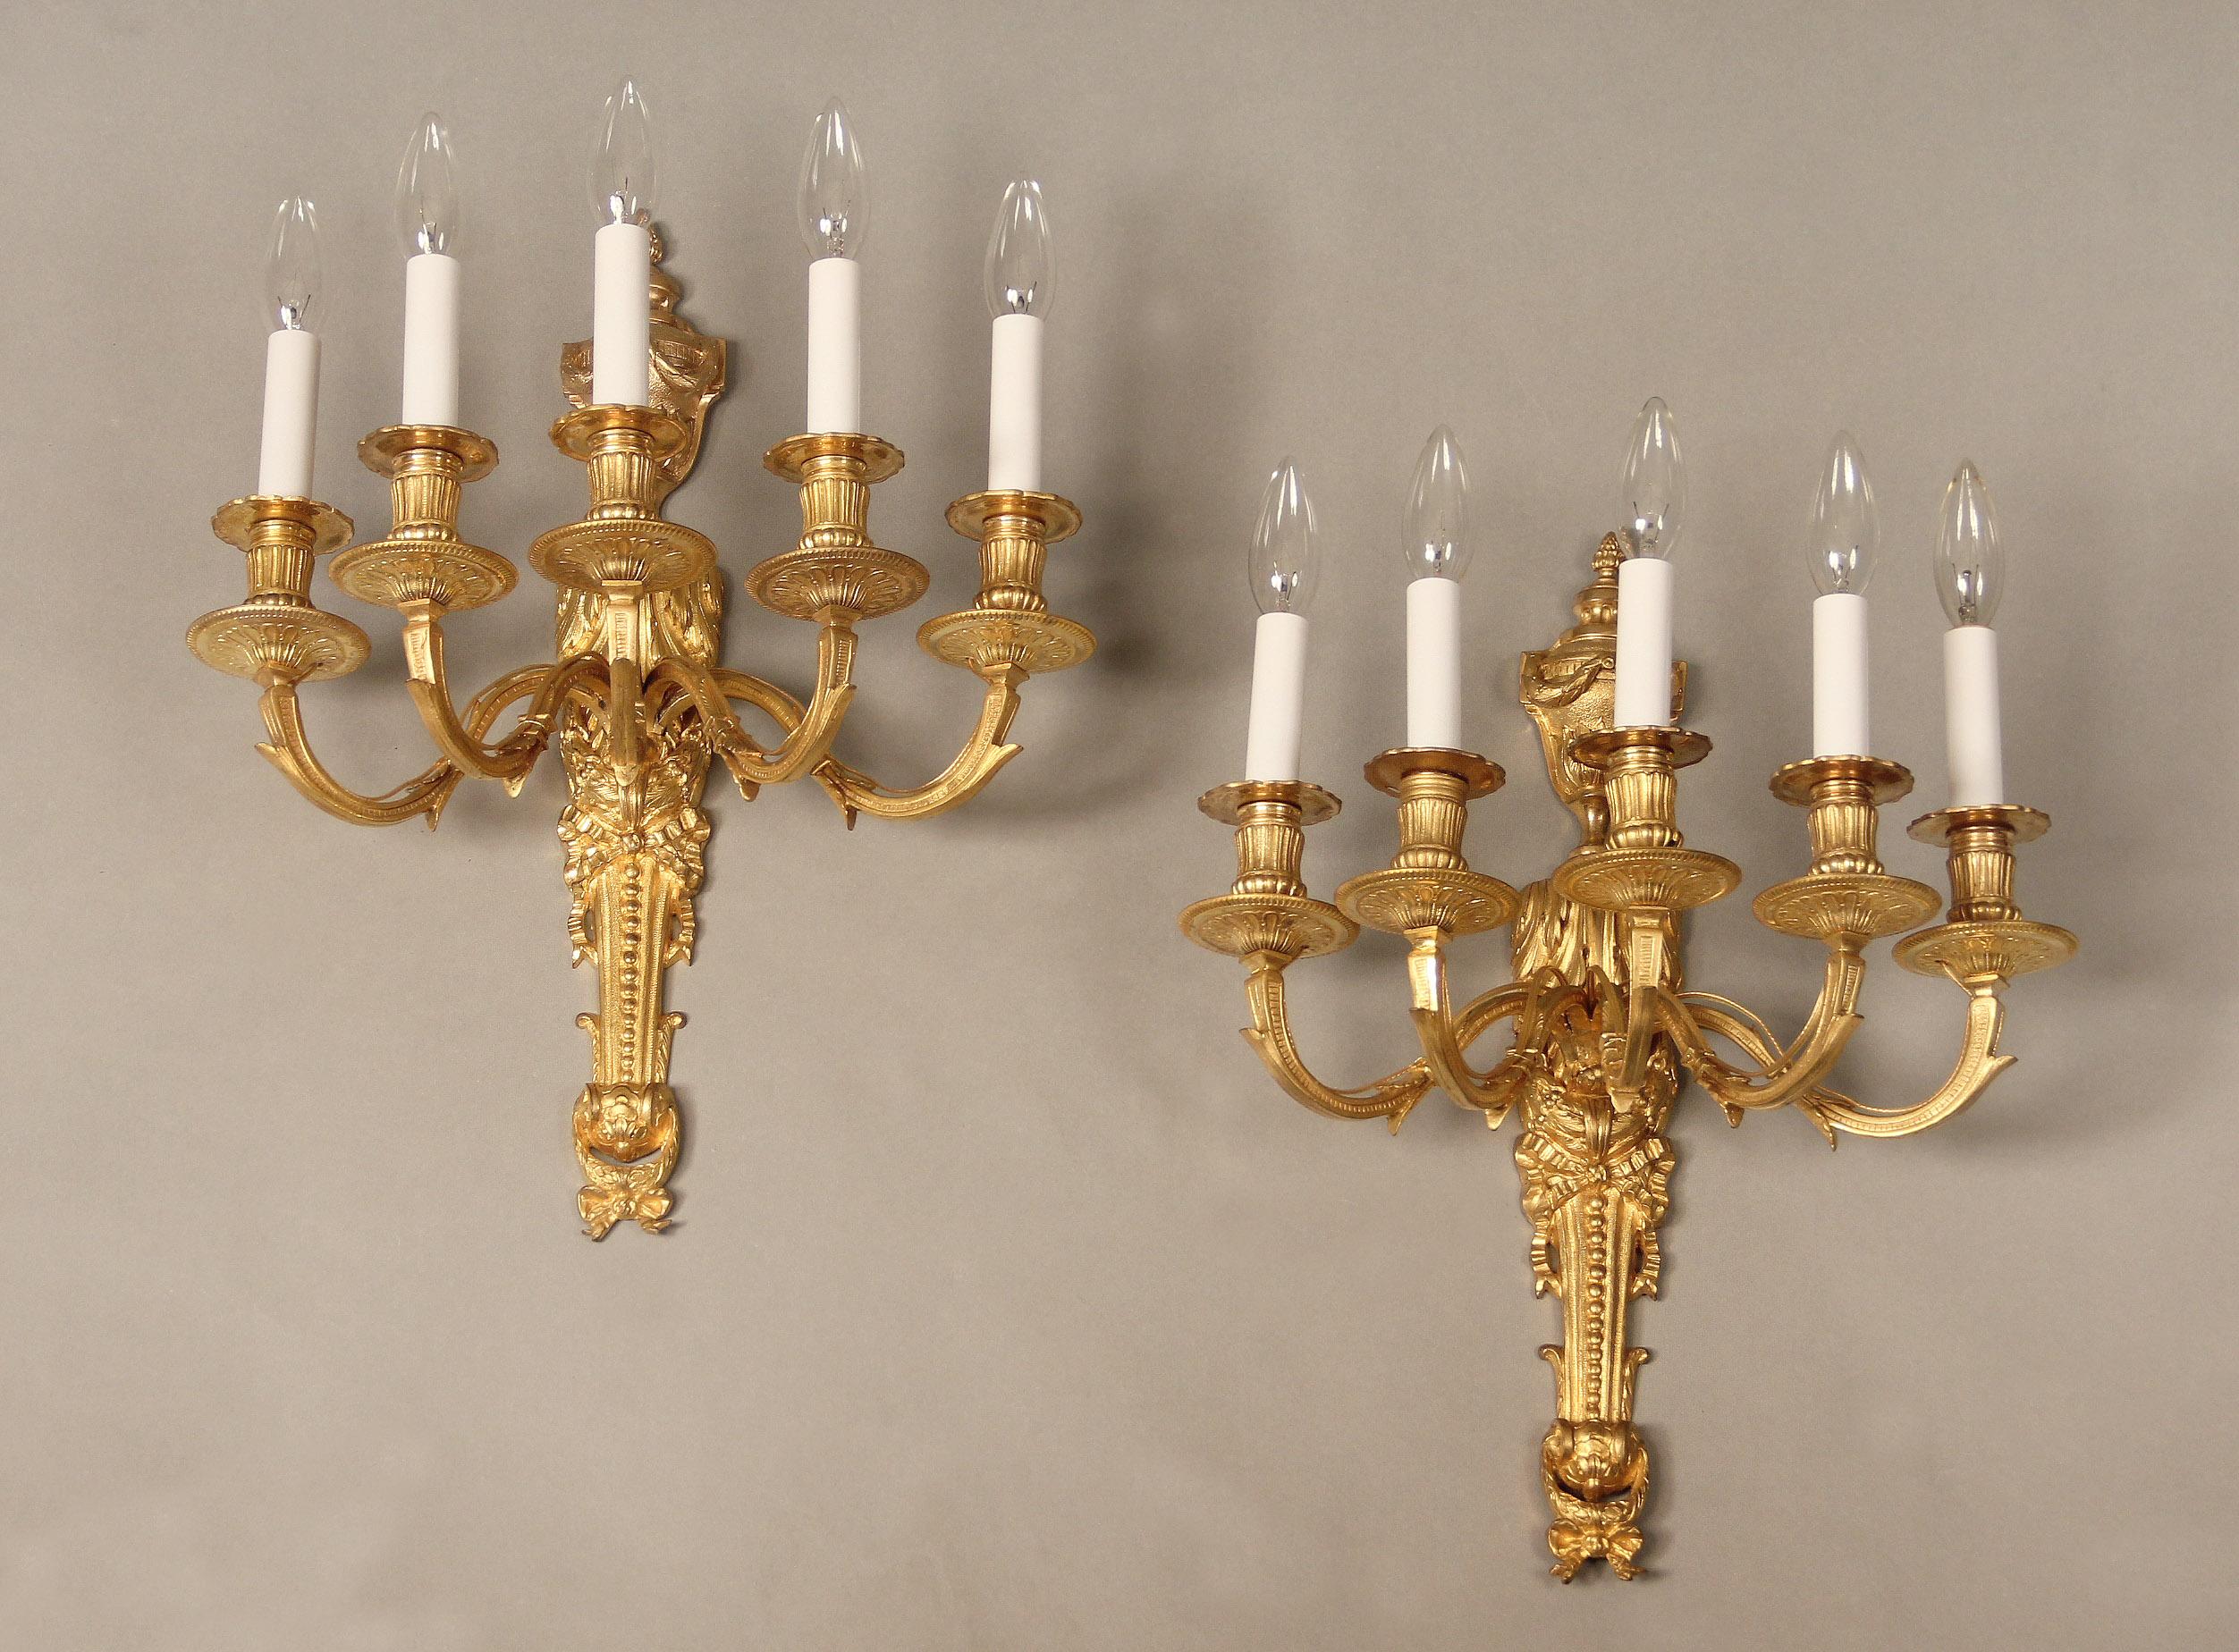 A nice pair of early 20th century gilt bronze five-light sconces

The top centered with an urn and the body with a tied bow, five scrolled arms.